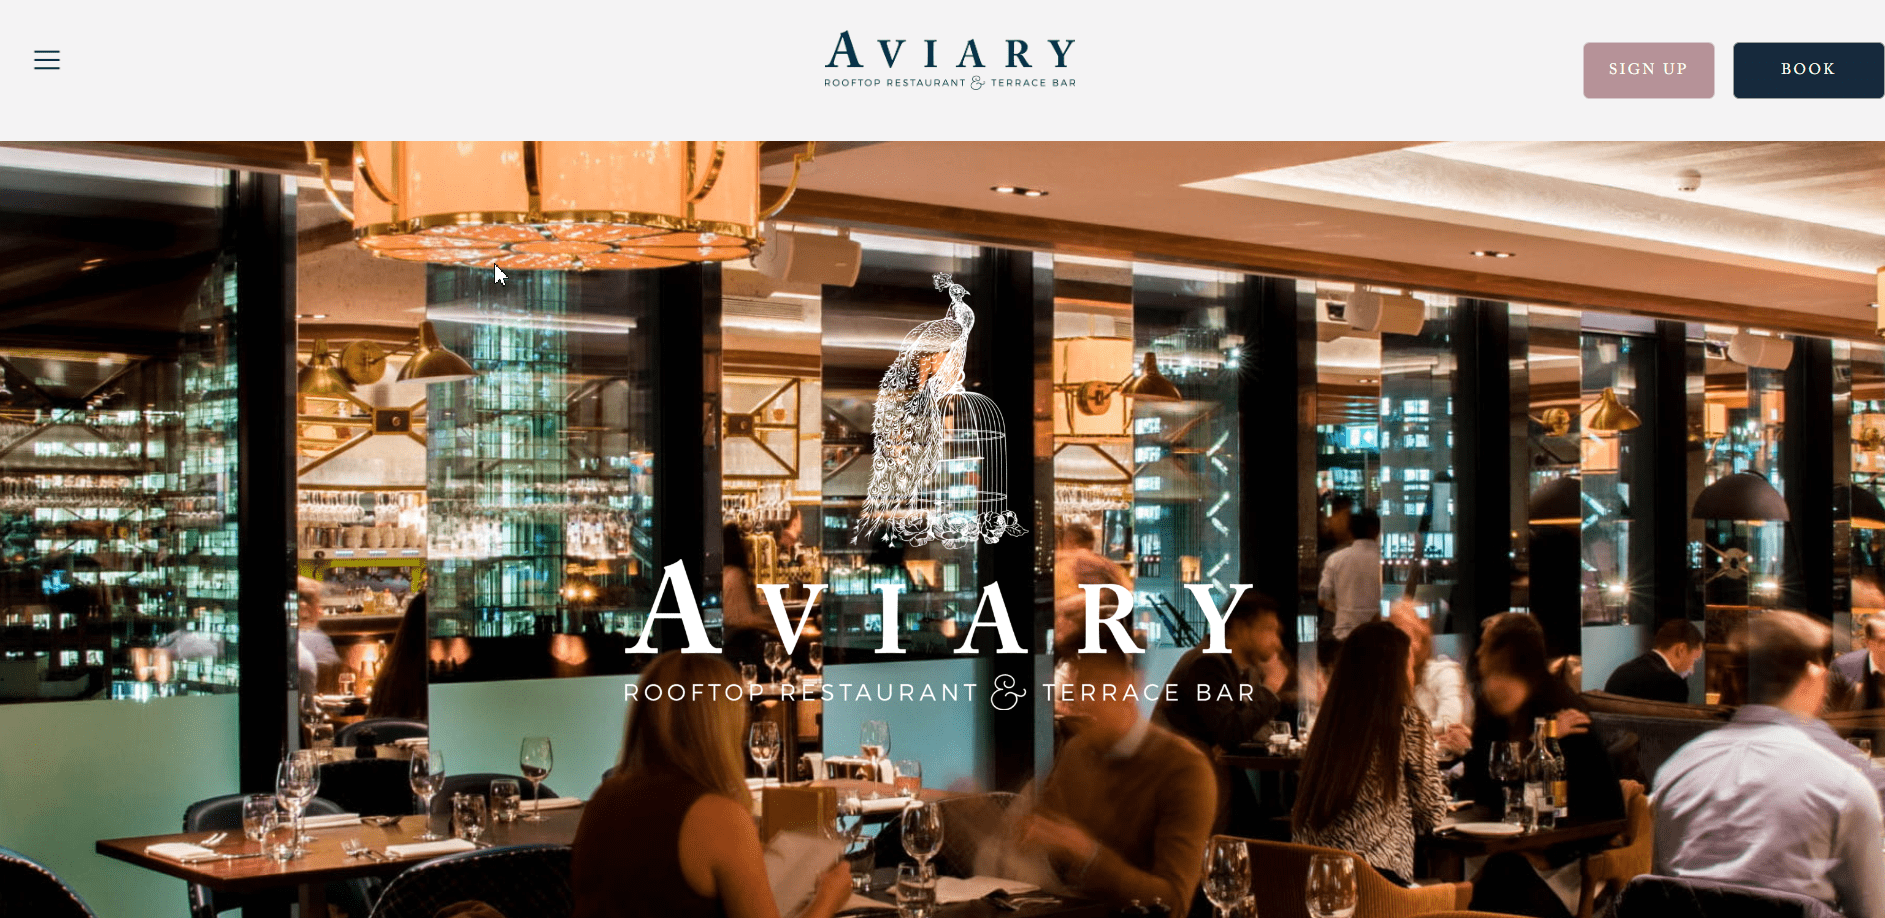 Aviary Rooftop Restaurant and Bar